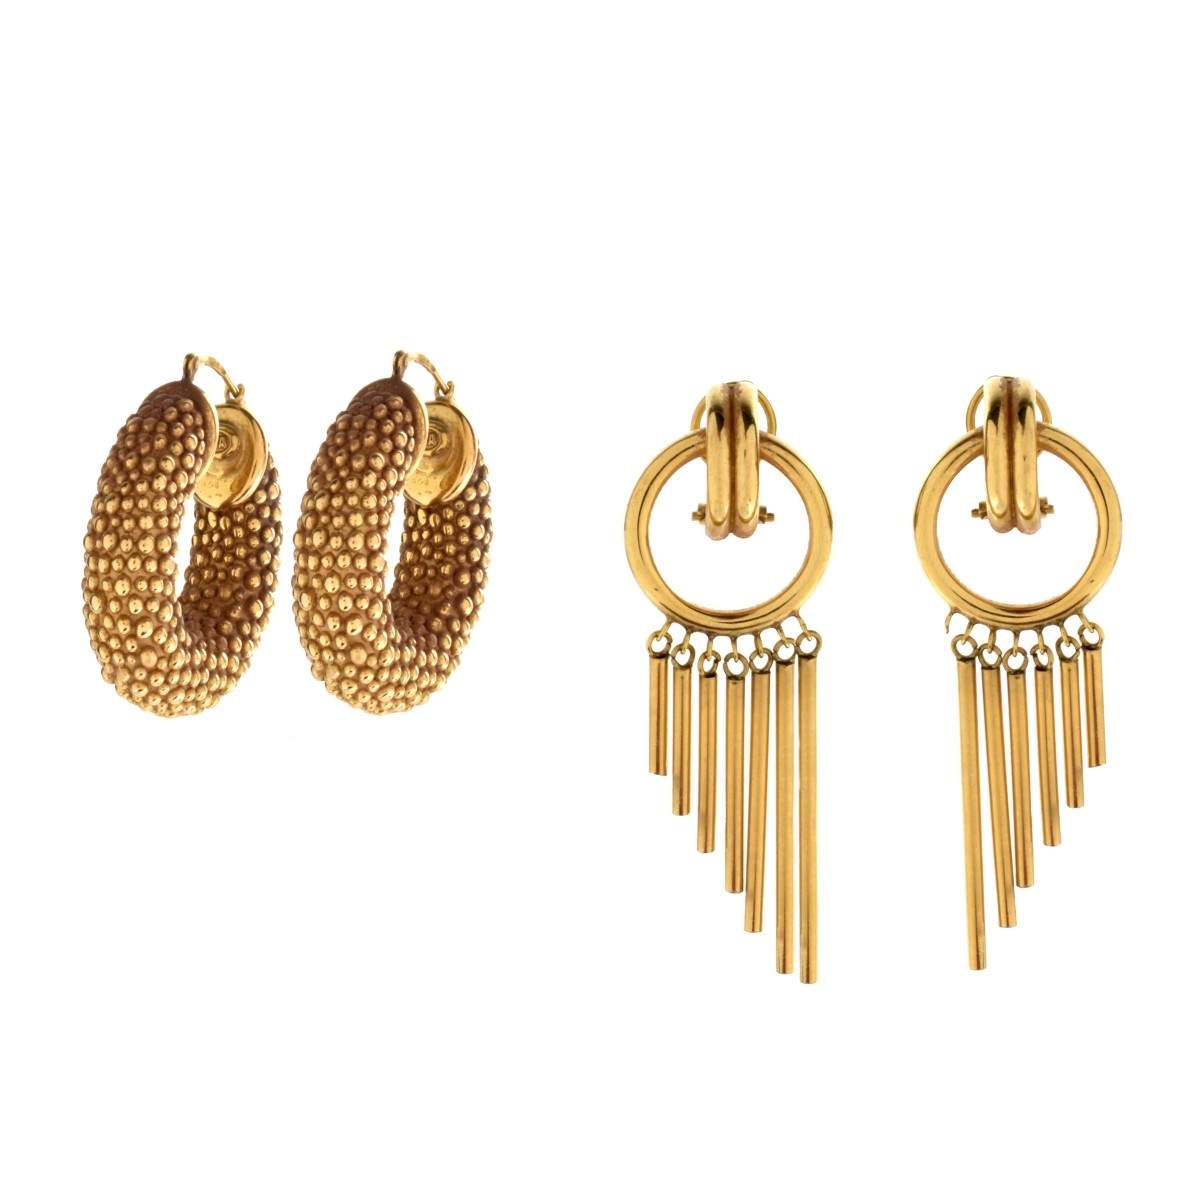 Two Pair Gold Earrings | Kodner Auctions